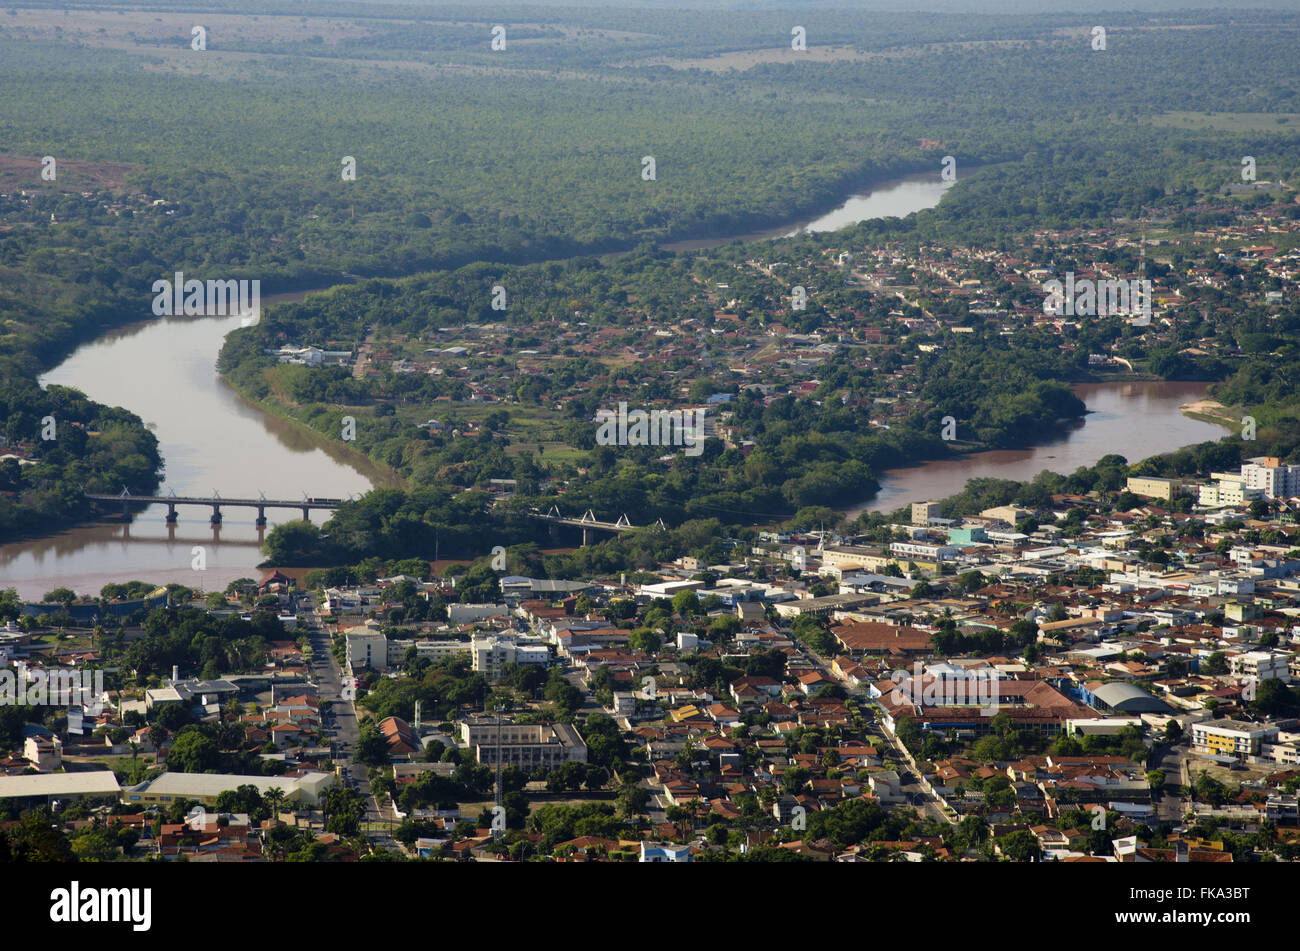 View of the city bathed by the Araguaia rivers in central and herons in the center right Stock Photo